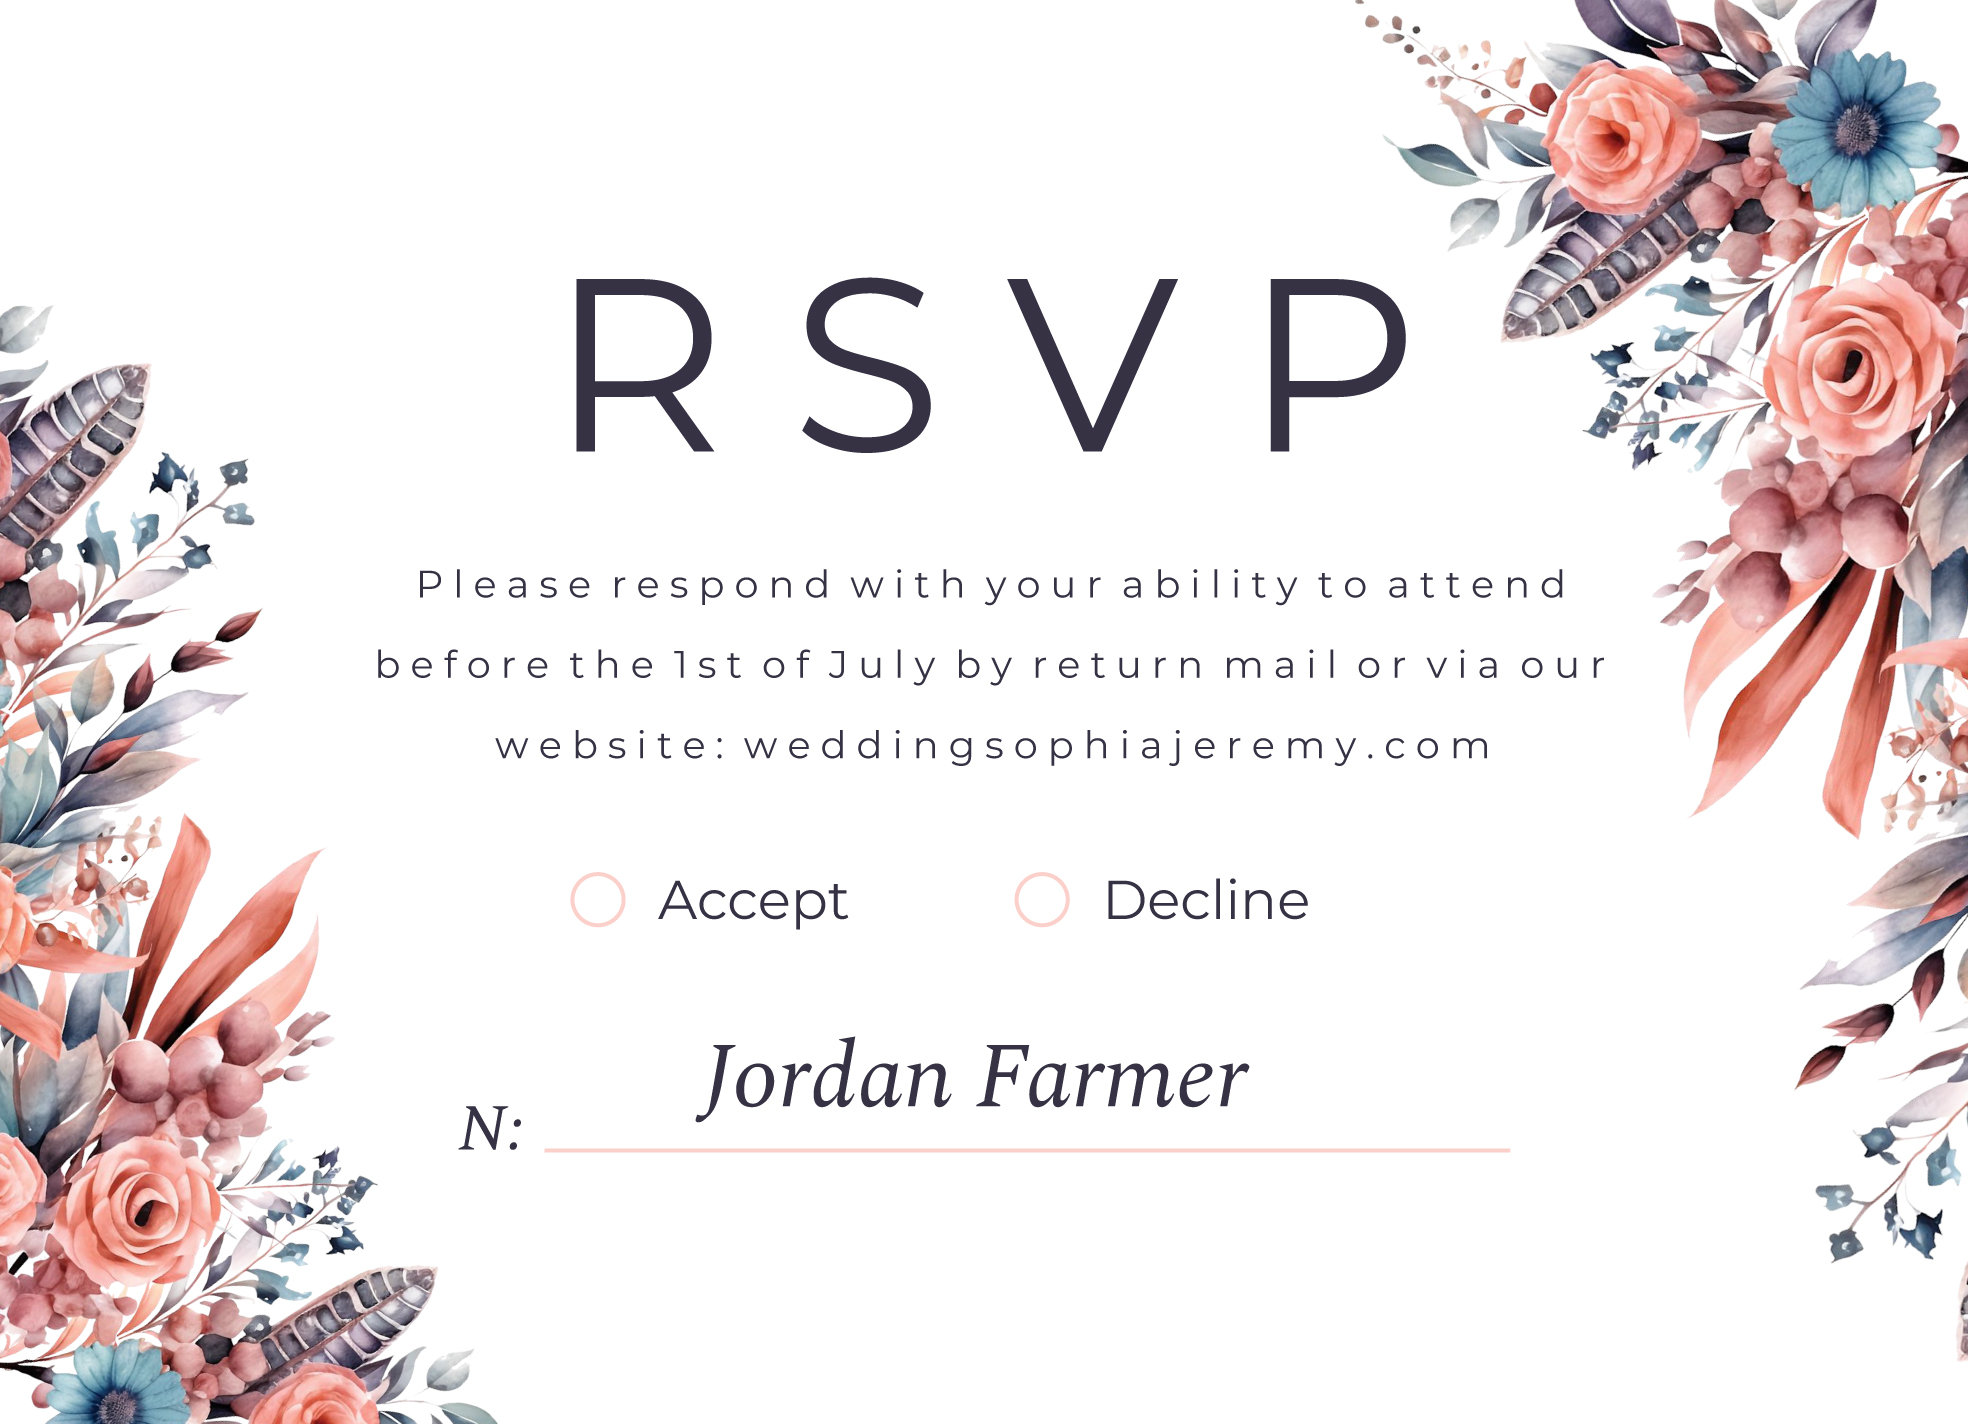 How to create a wedding RSVP form using Google Forms